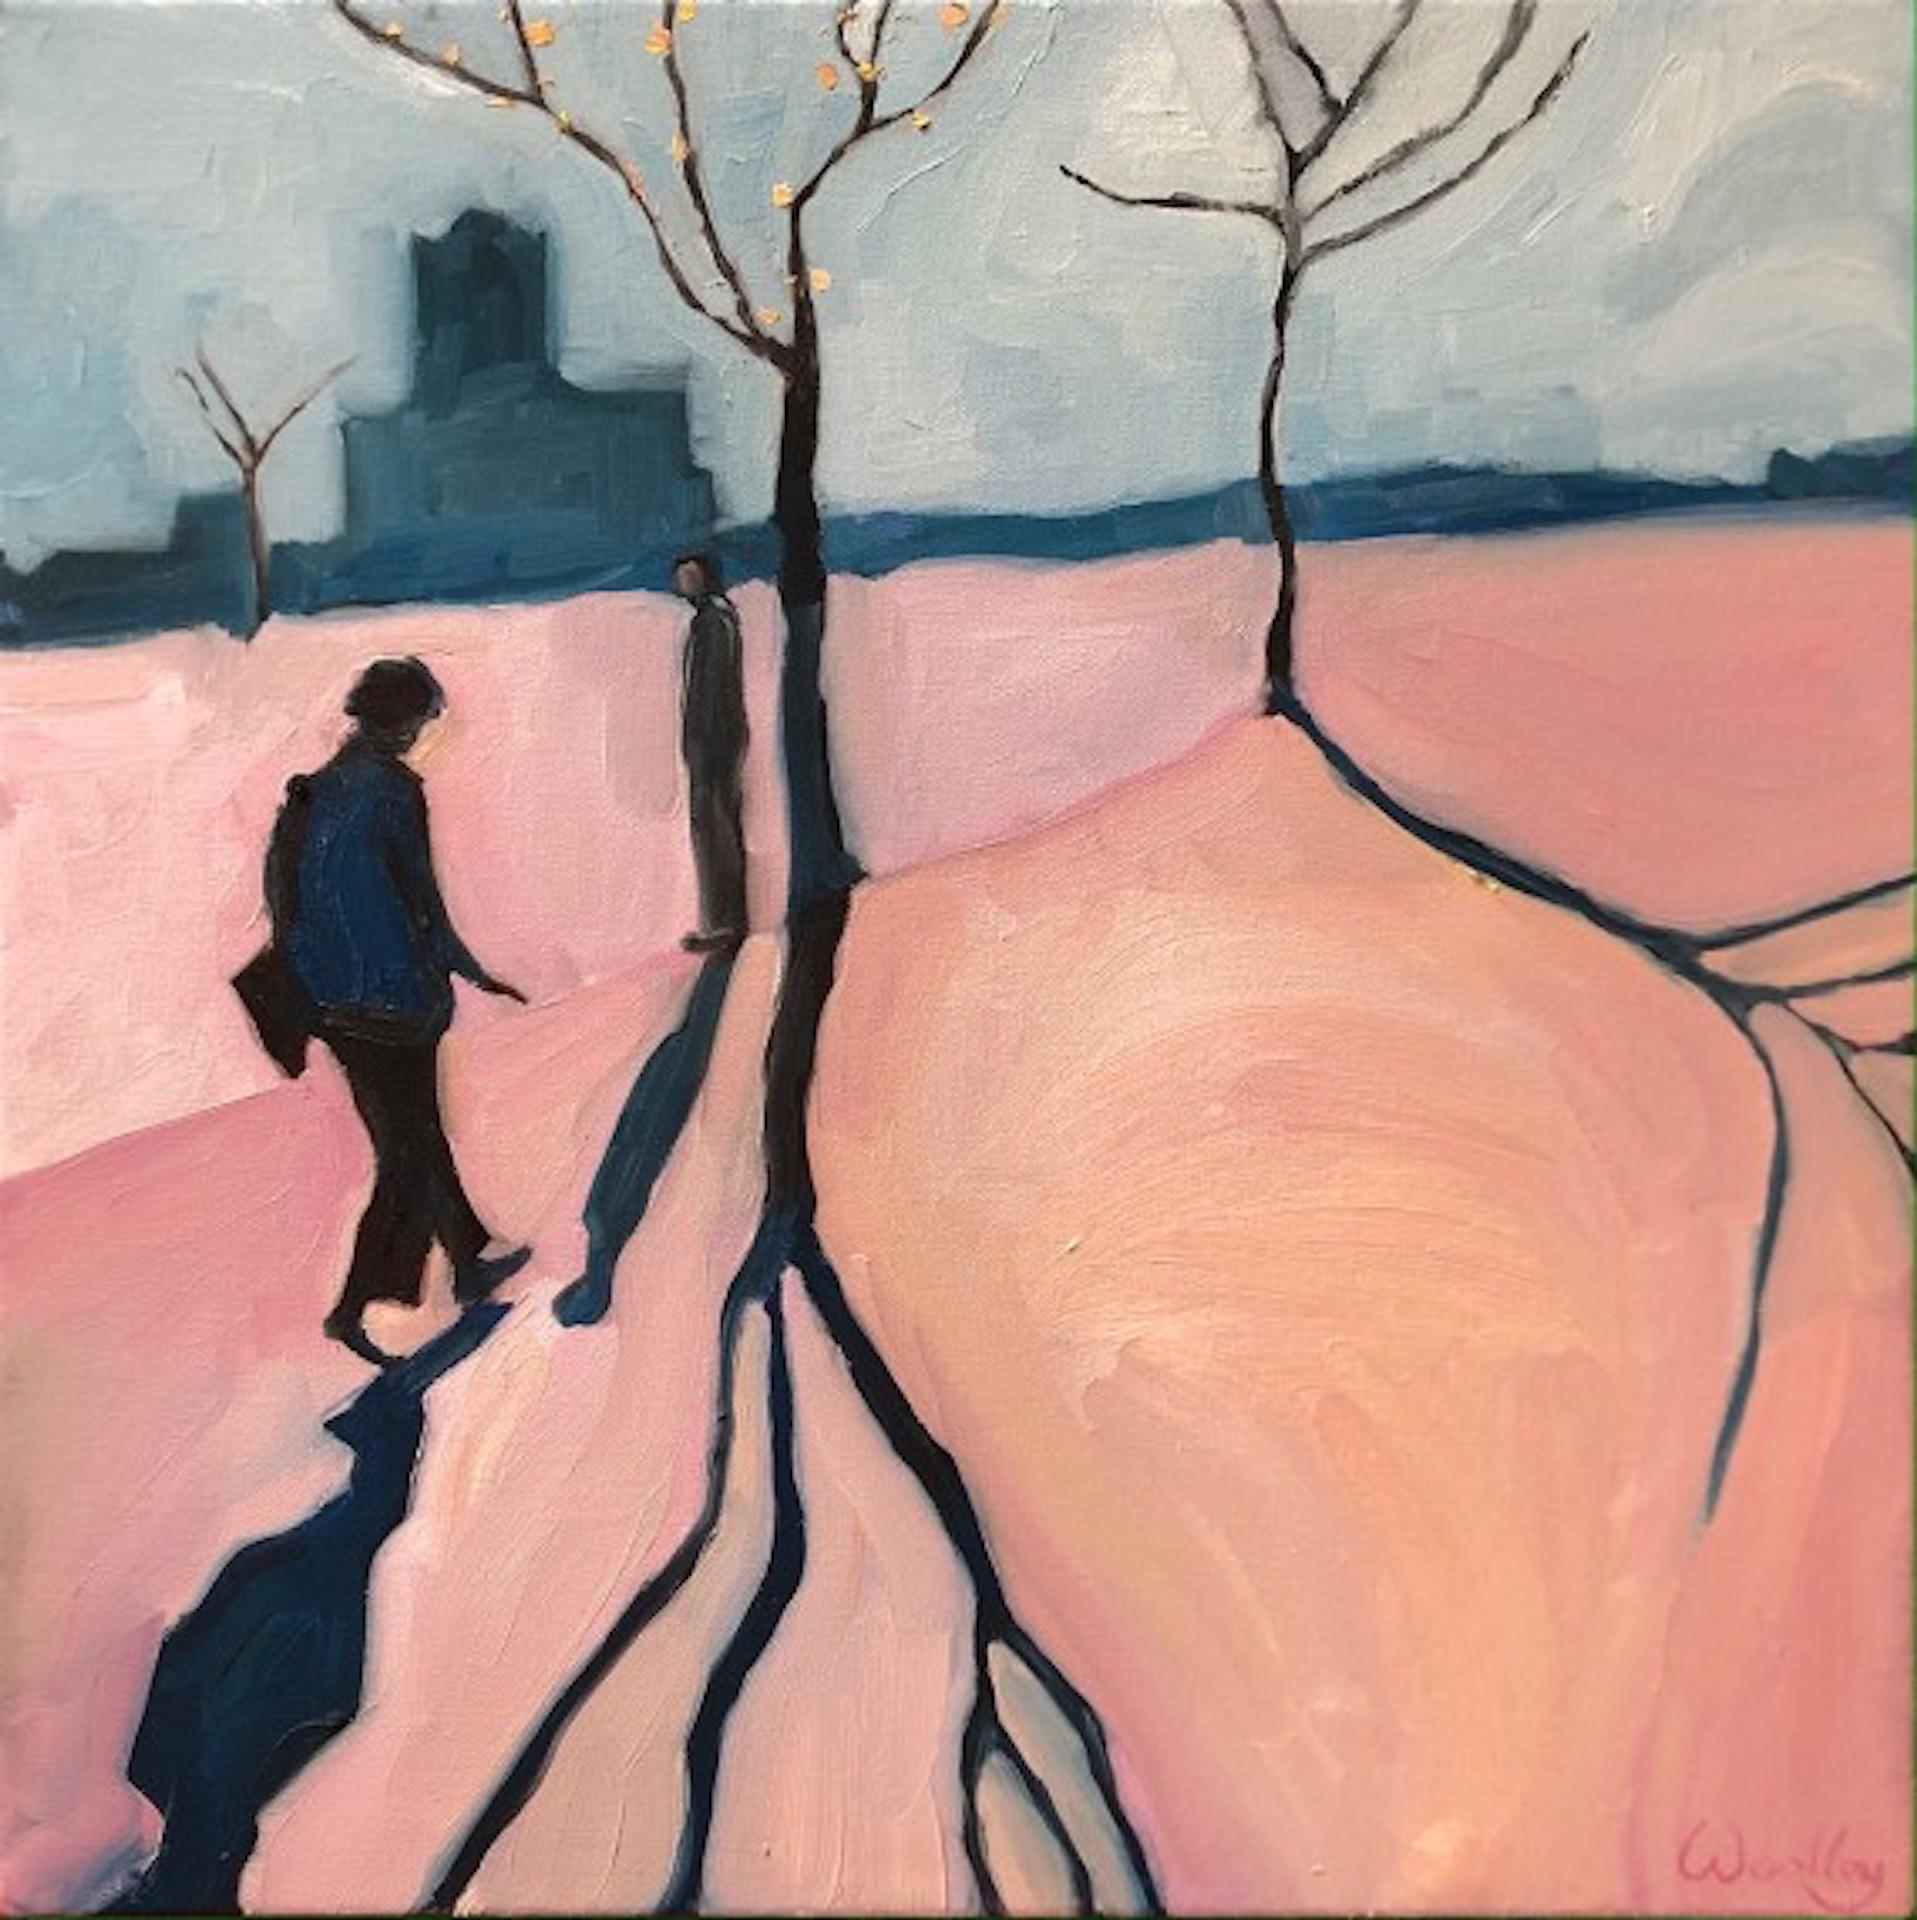 Street Shadows 3 [February 2021]
Original
Figurative
Oil Paint on Canvas
Canvas Size: H:50 cm x W:50 cm x D:3.5cm
Sold Unframed
Please note that insitu images are purely an indication of how a piece may look

Street Shadows 3 is an Original Oil